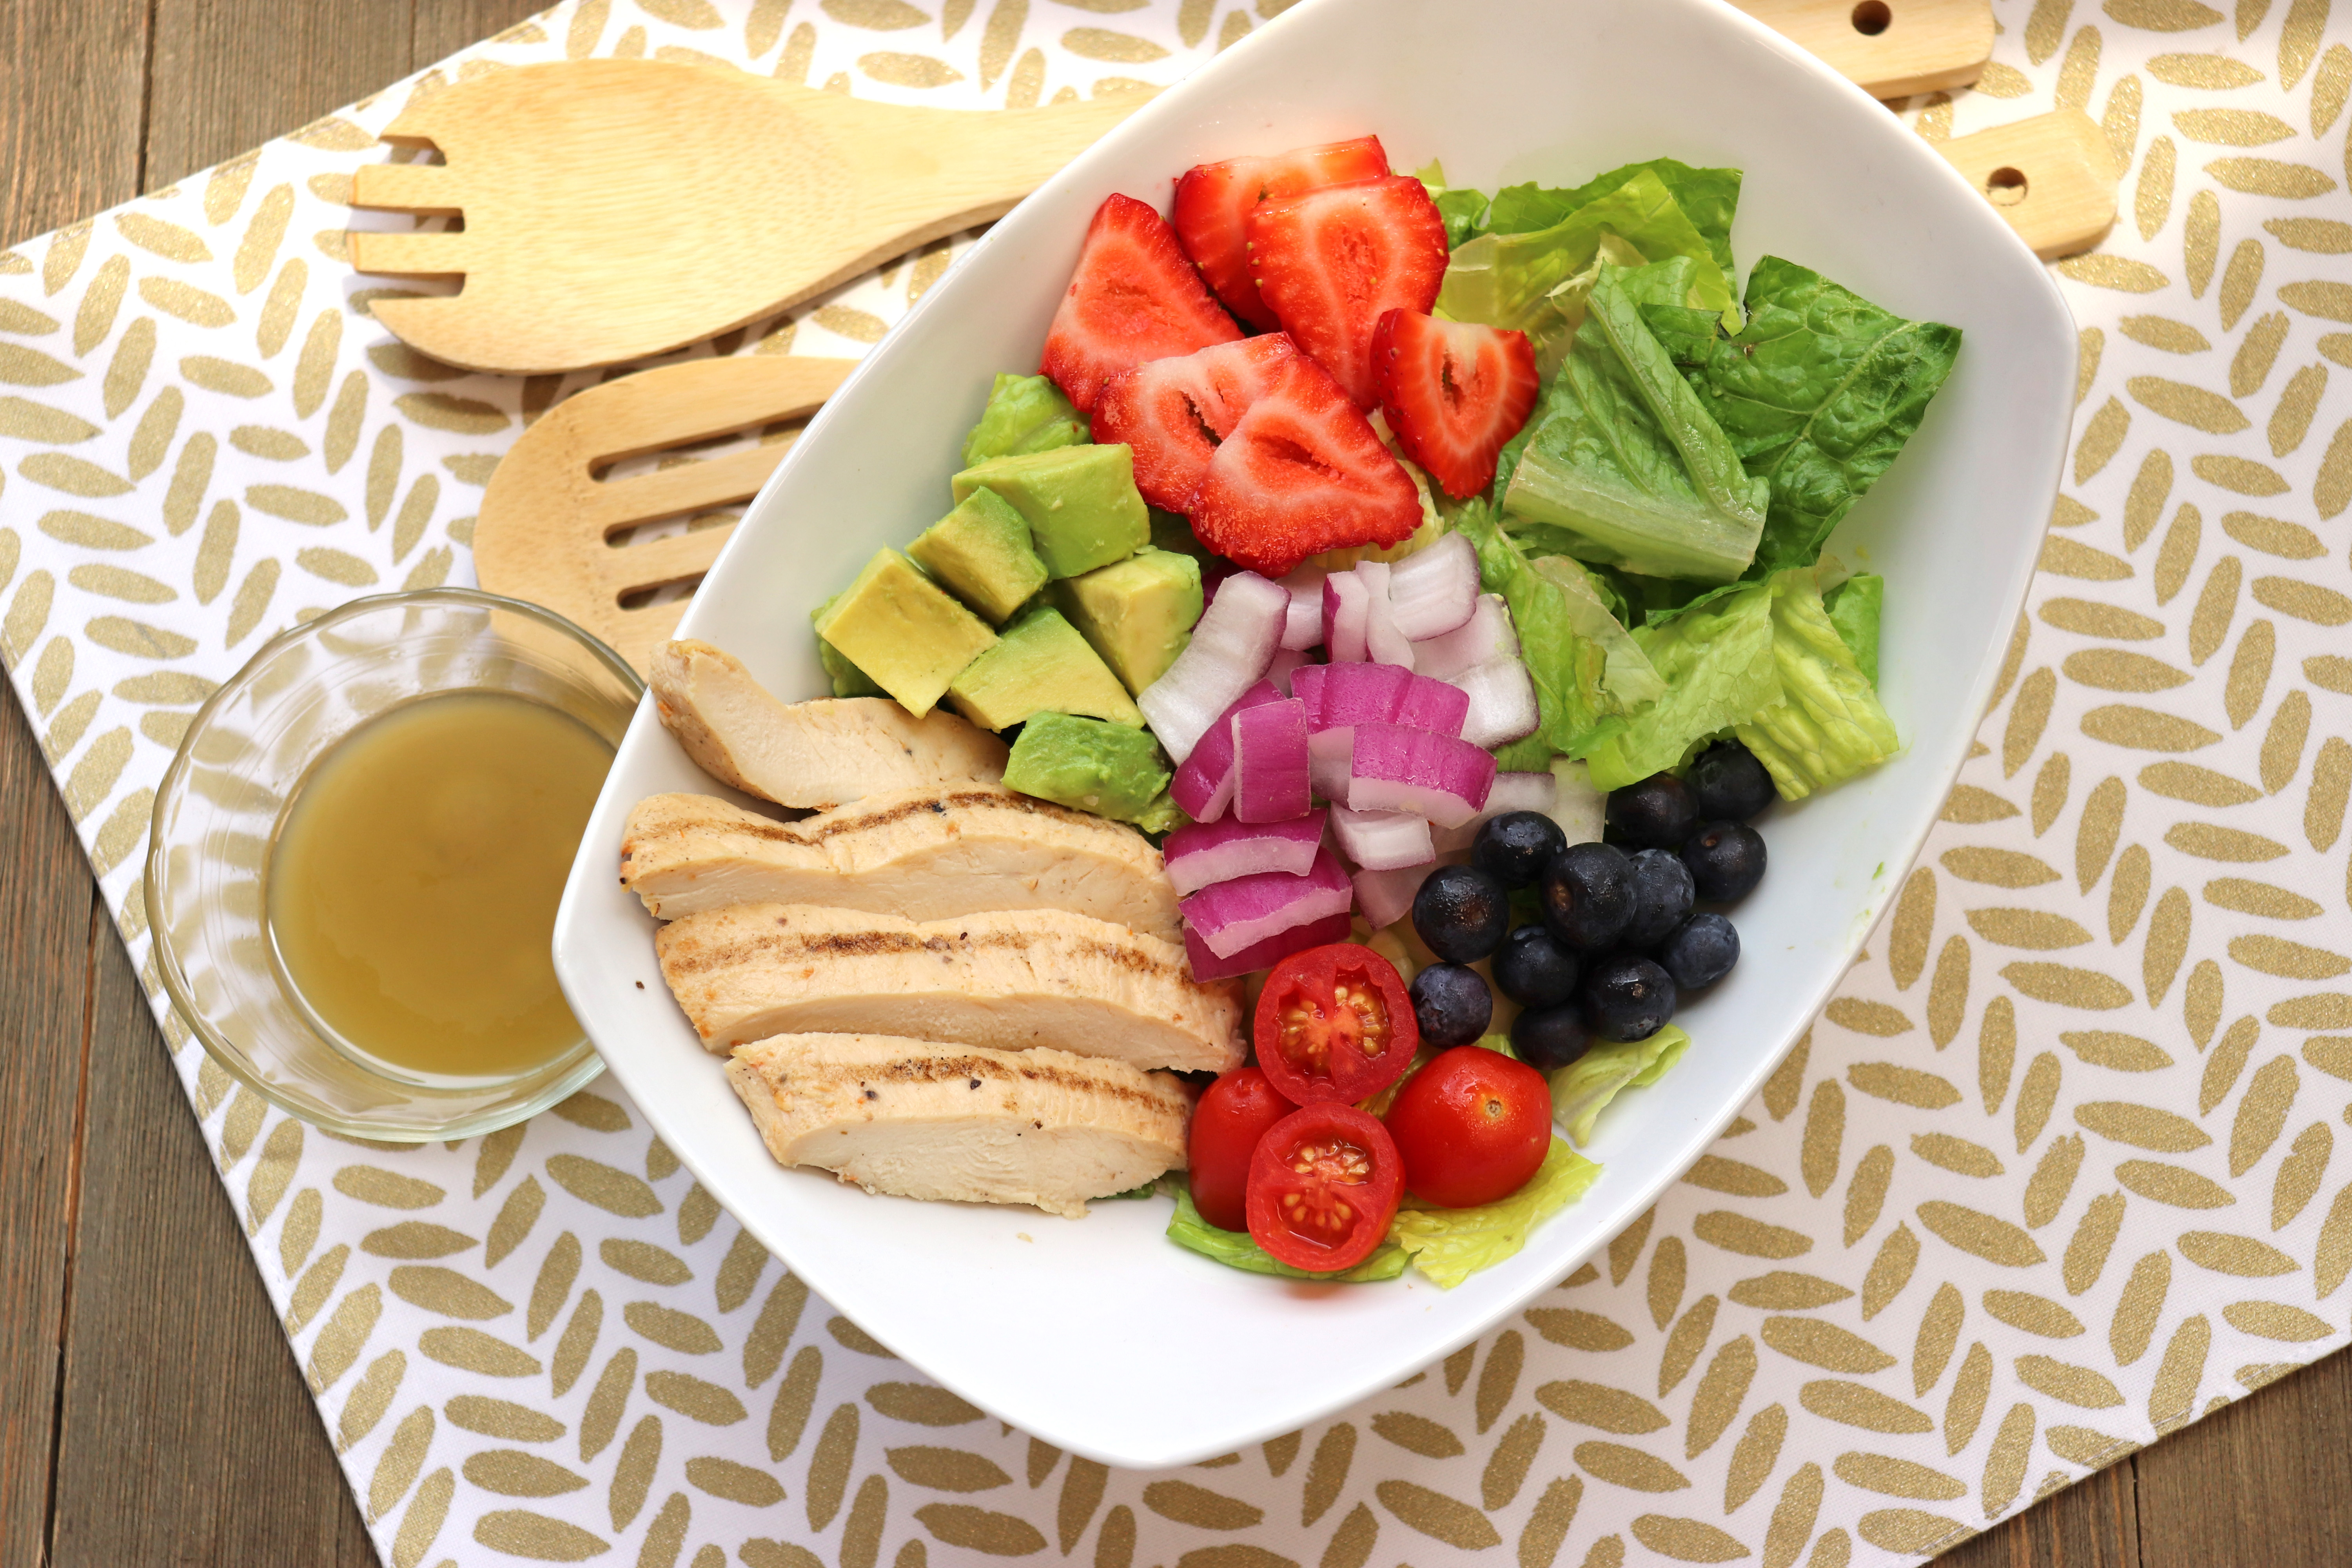 This grilled chicken salad is lighter fare to enjoy during the warm summer months. (NDSU photo)